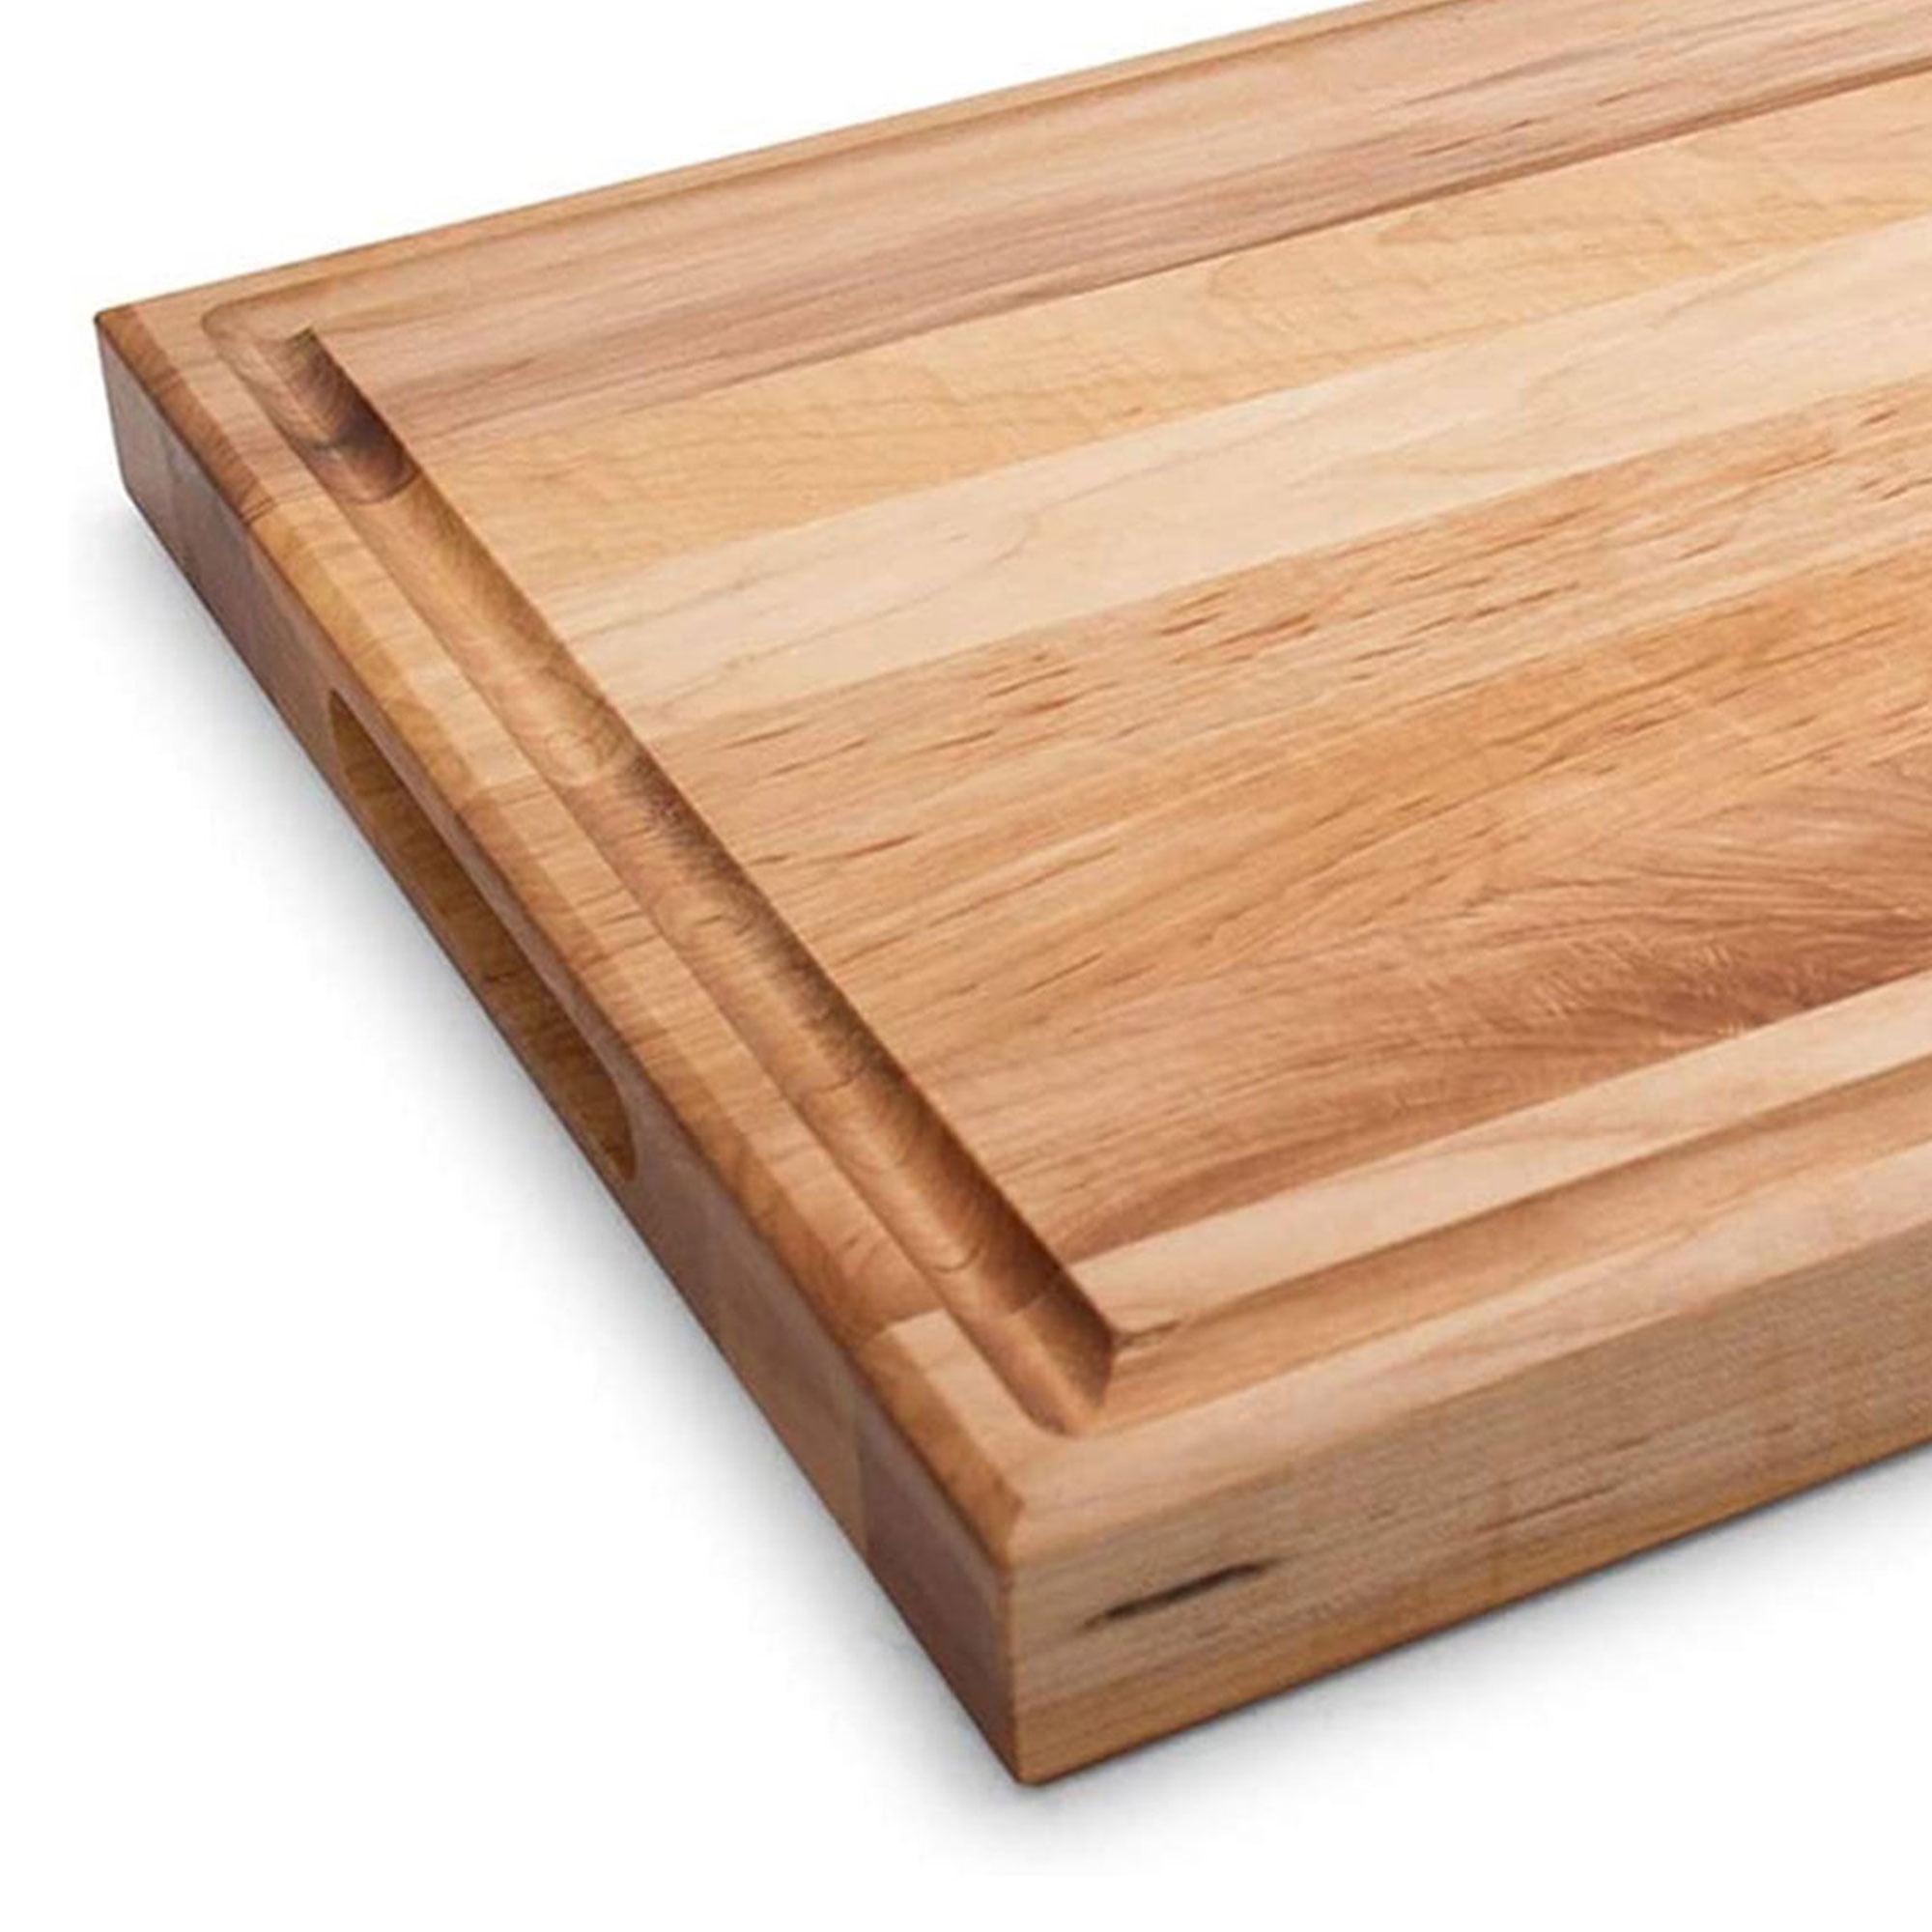 Large Thick Maple Wood Cutting Board for Kitchen with Juice Groove, Sorting Compartment, Charcuterie Wooden Board Bassetts